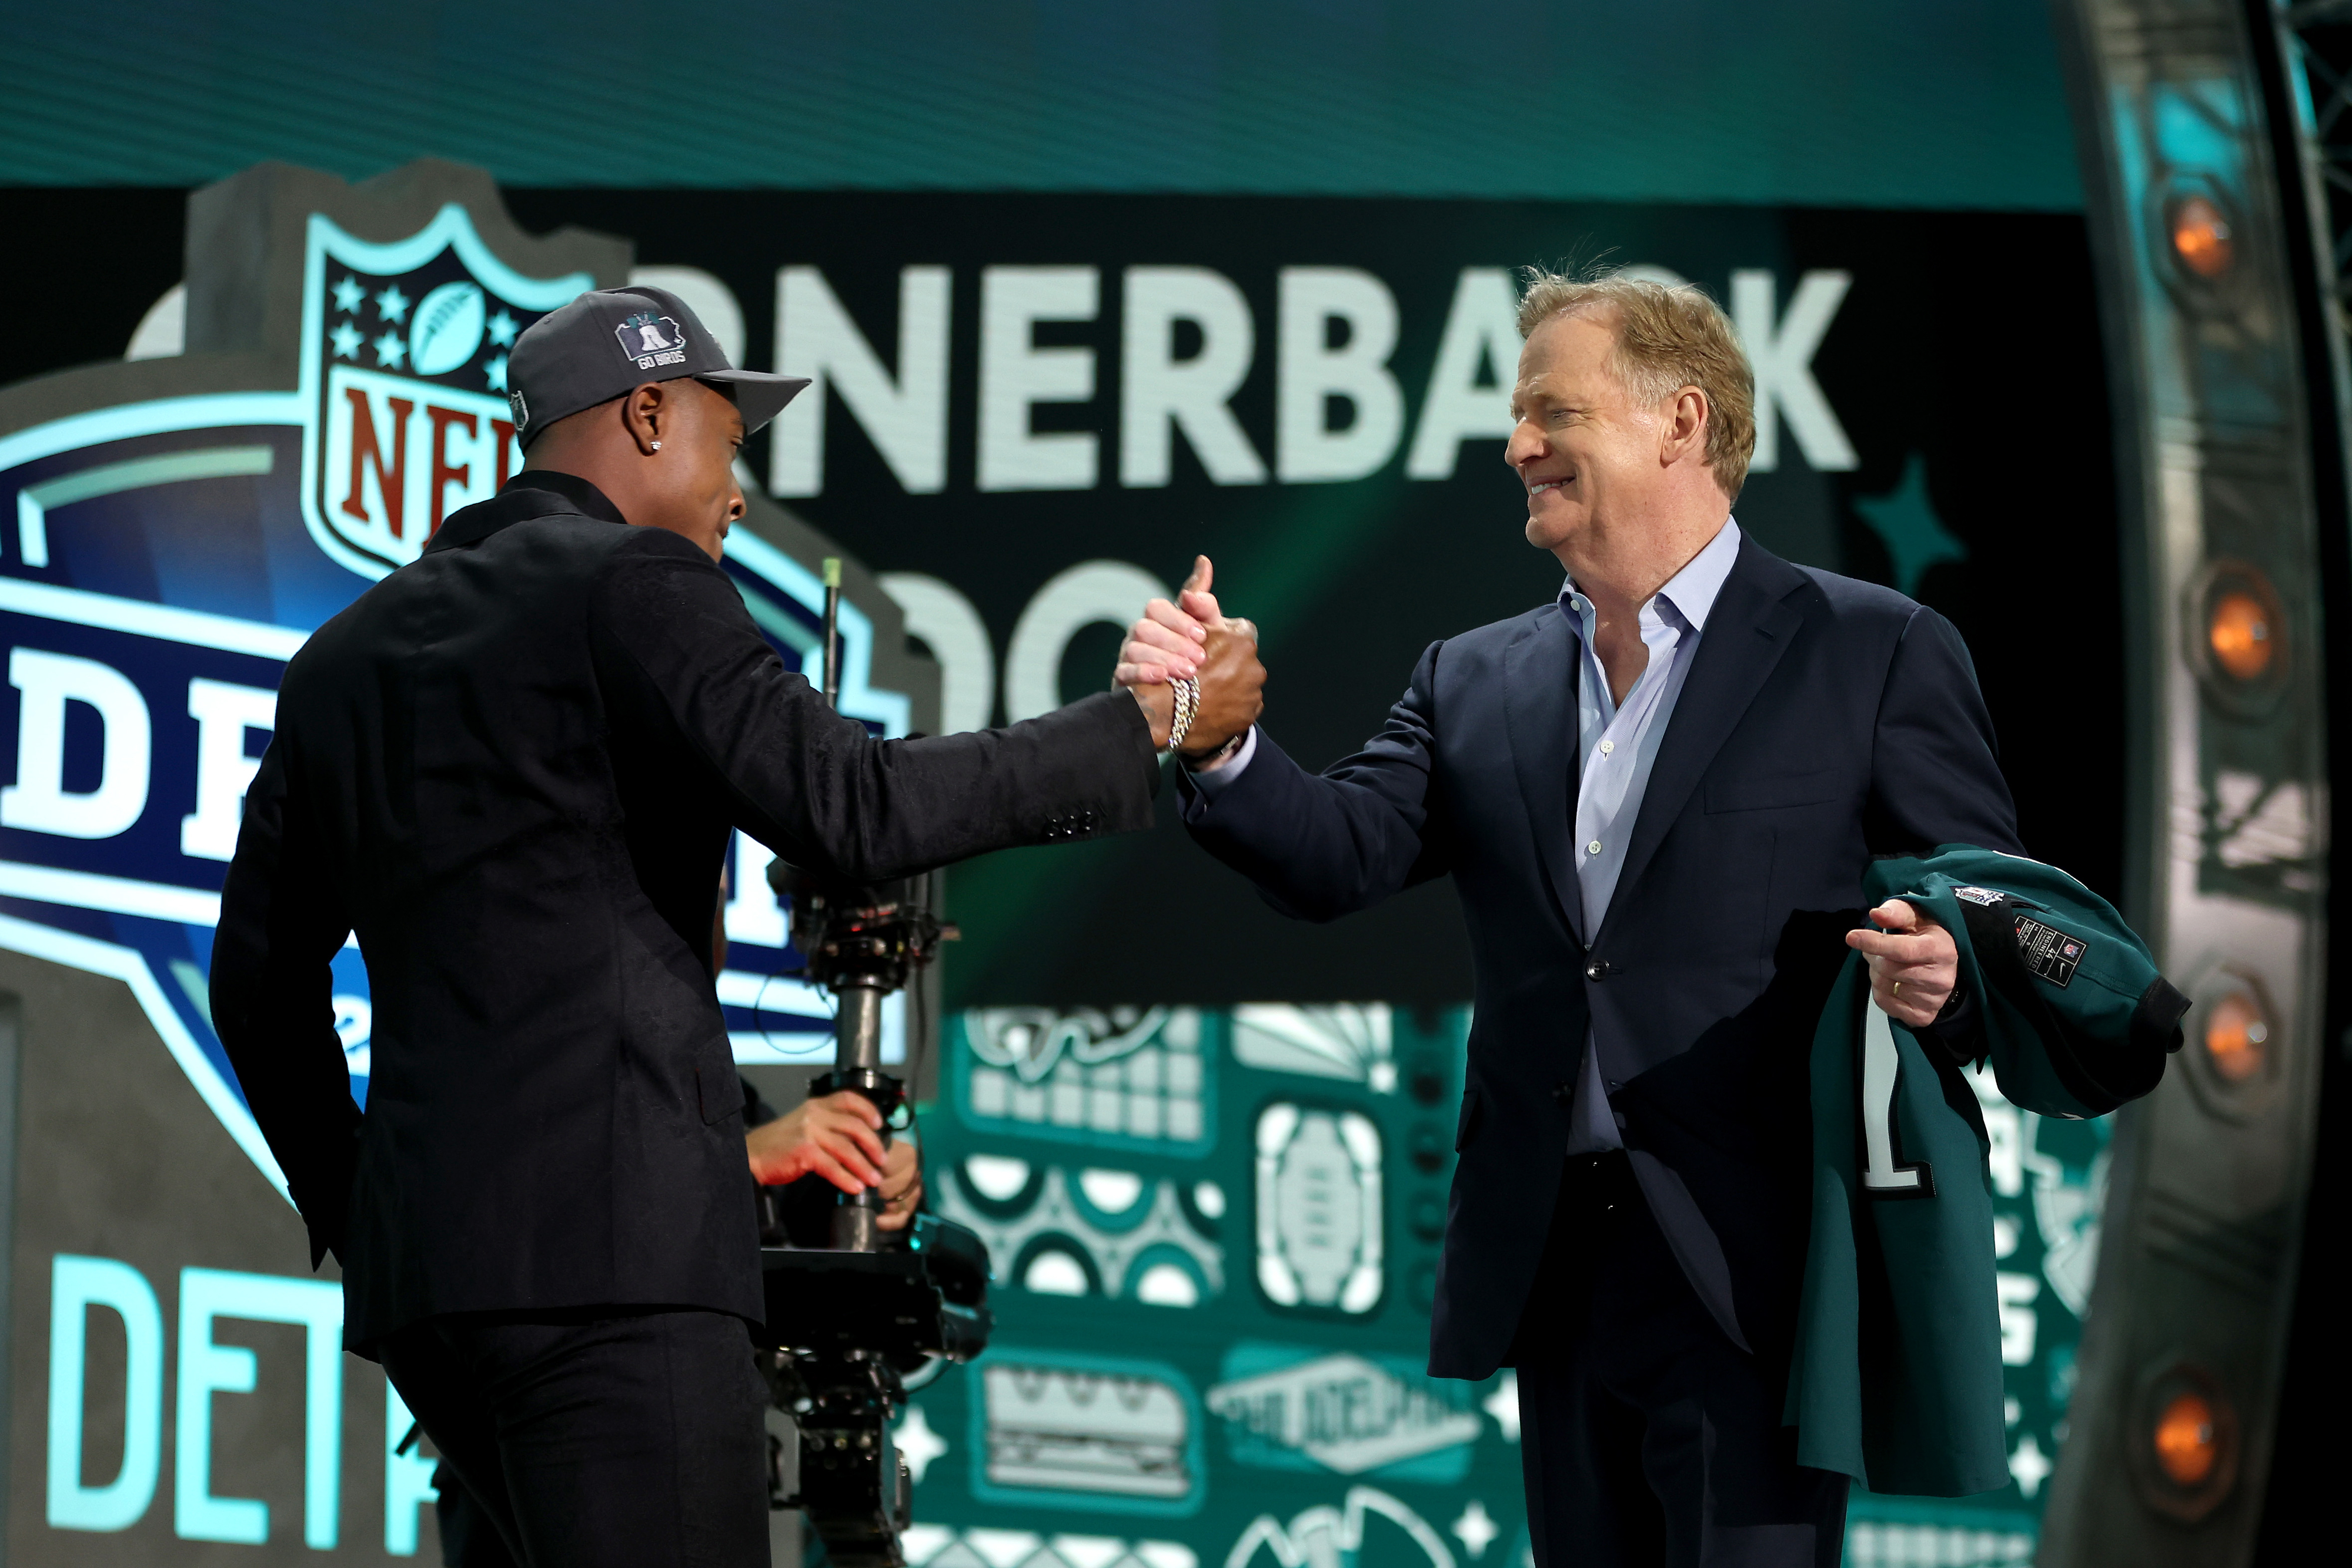 Two men on stage at an NFL event shaking hands, one passing a cap, backdrop with NFL logos